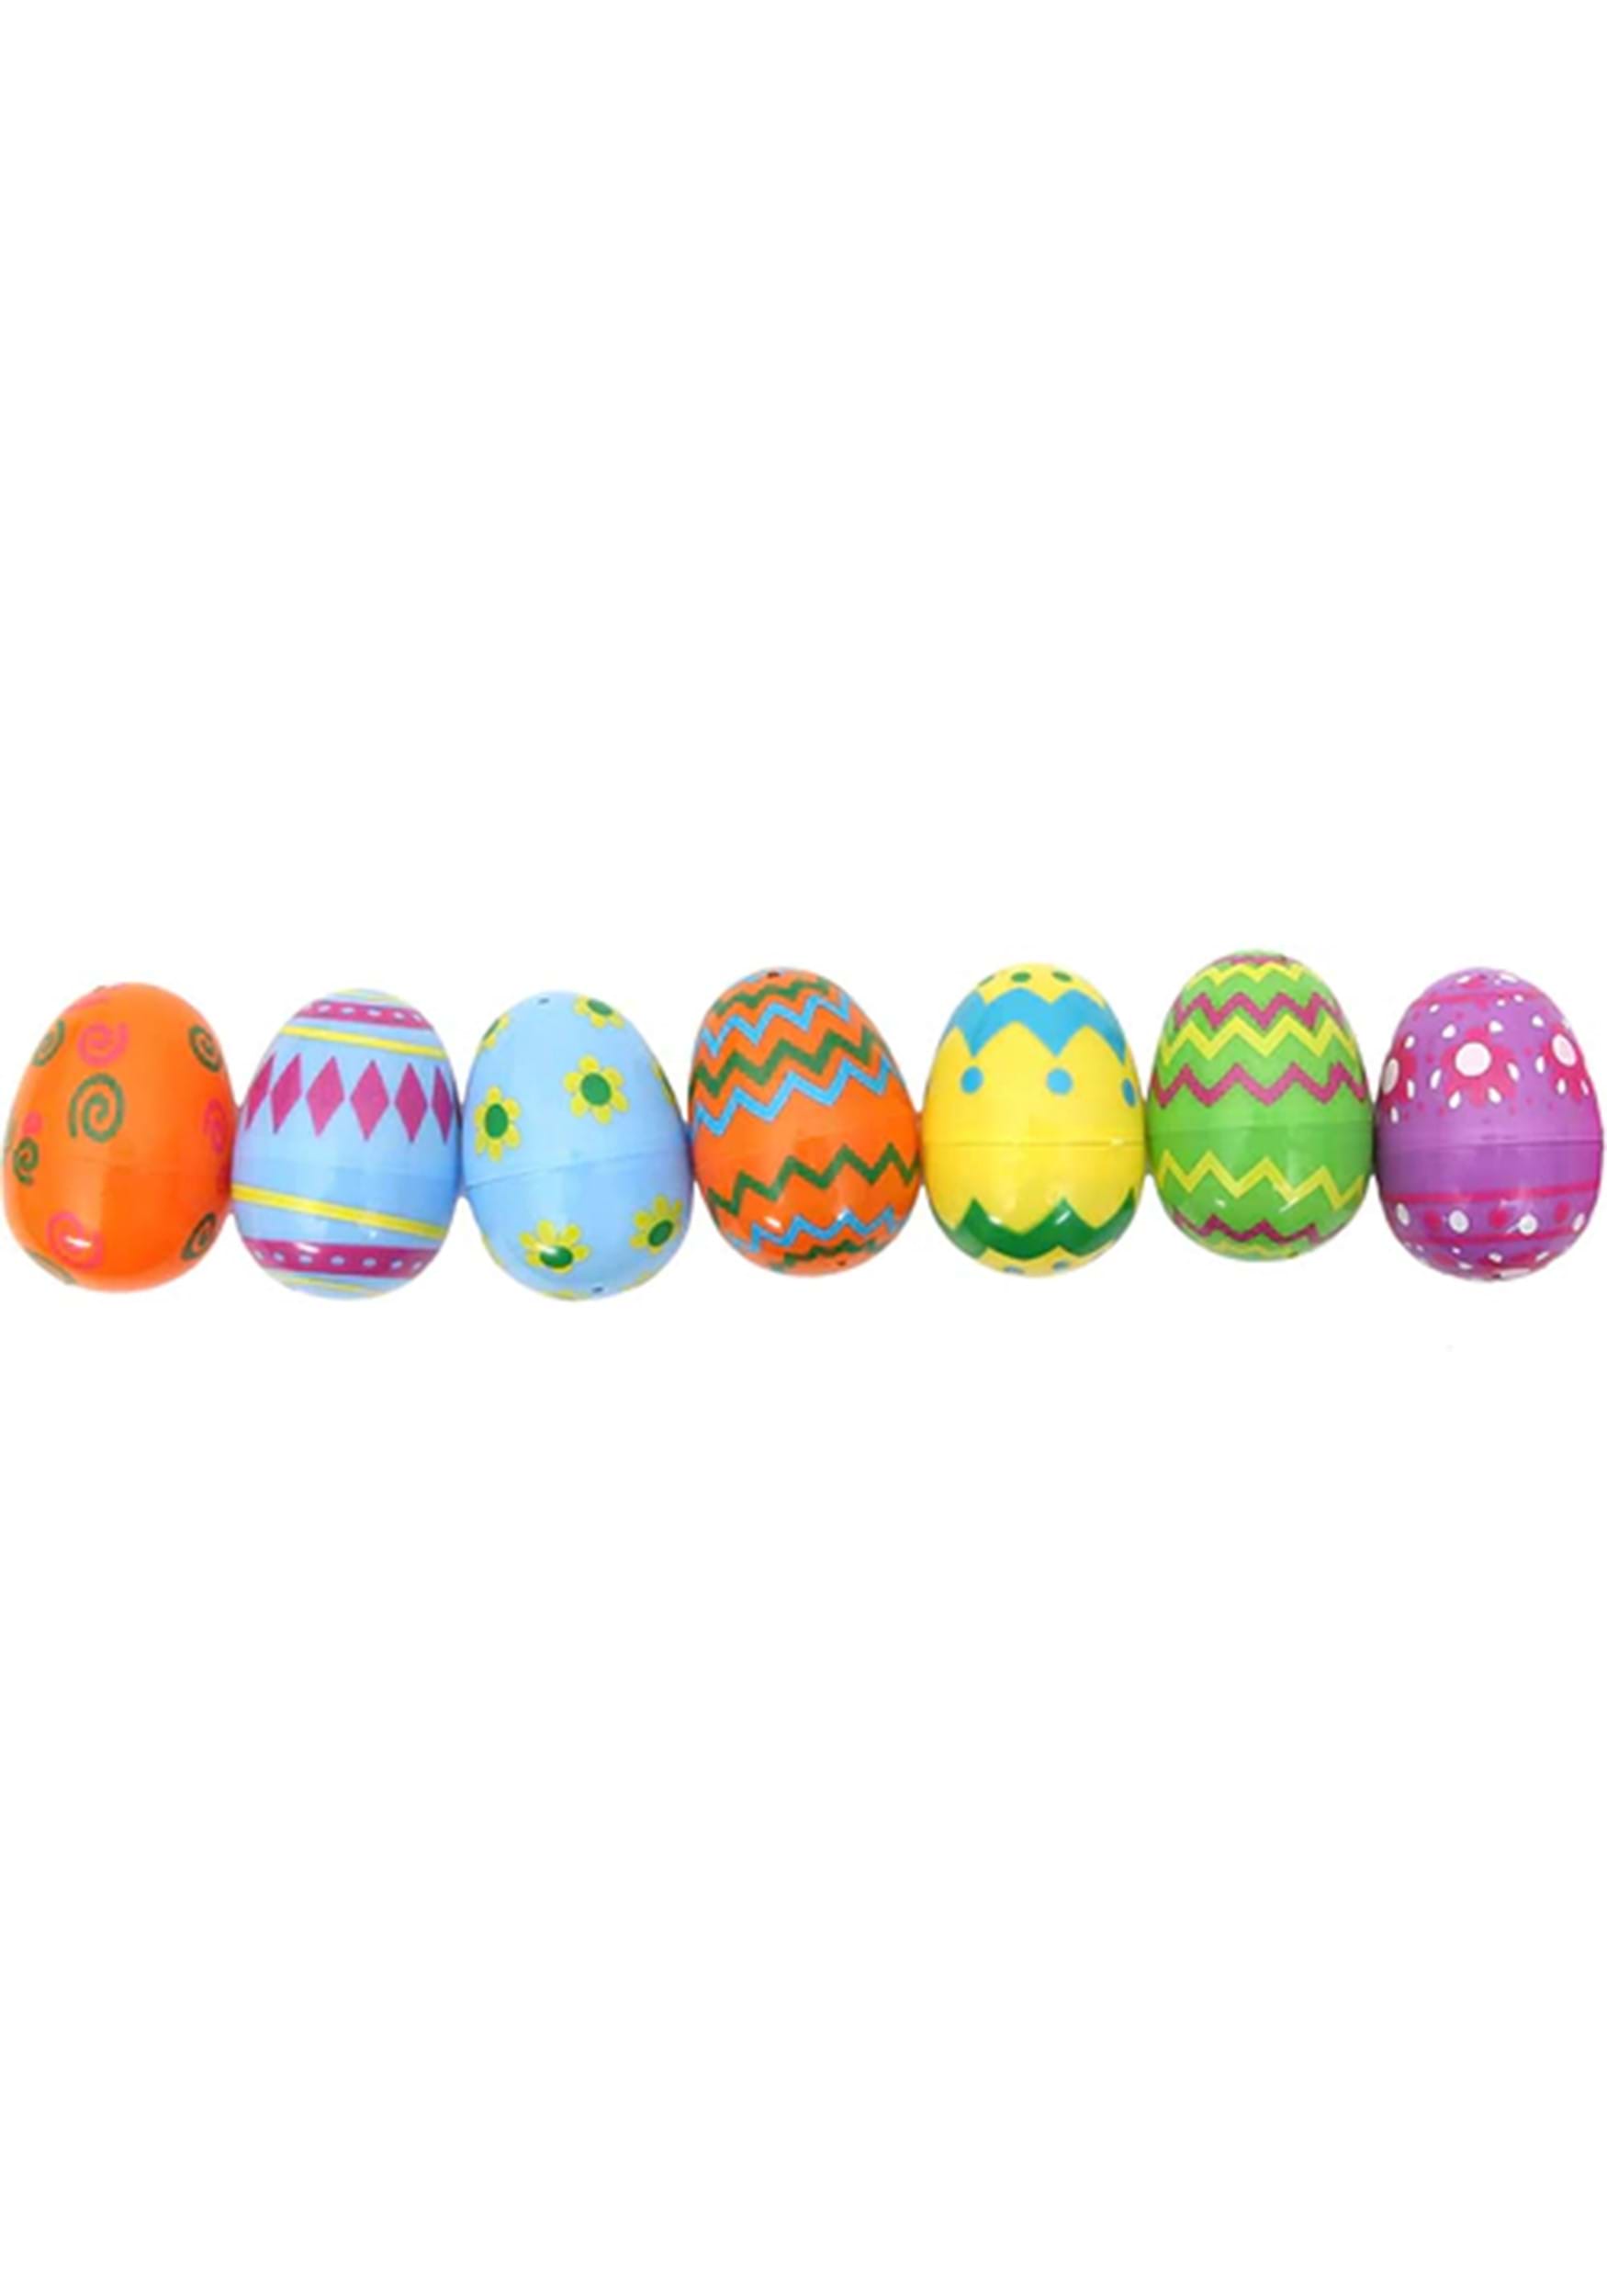 100 Piece Printed Plastic Egg Shells , Easter Egg Hunt Accessories